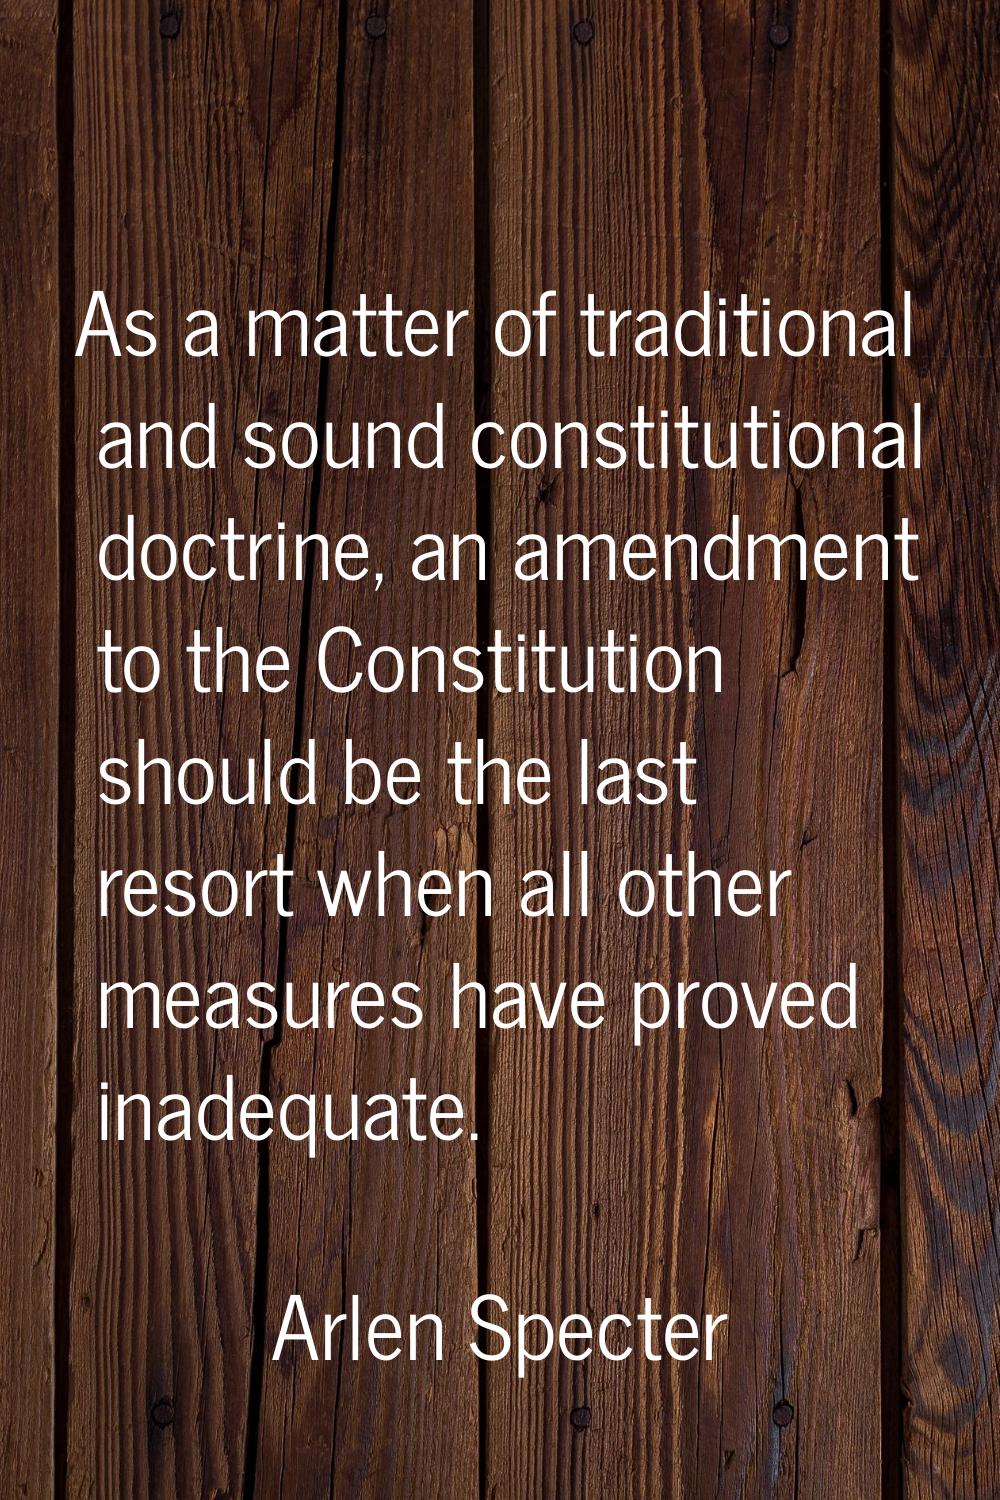 As a matter of traditional and sound constitutional doctrine, an amendment to the Constitution shou